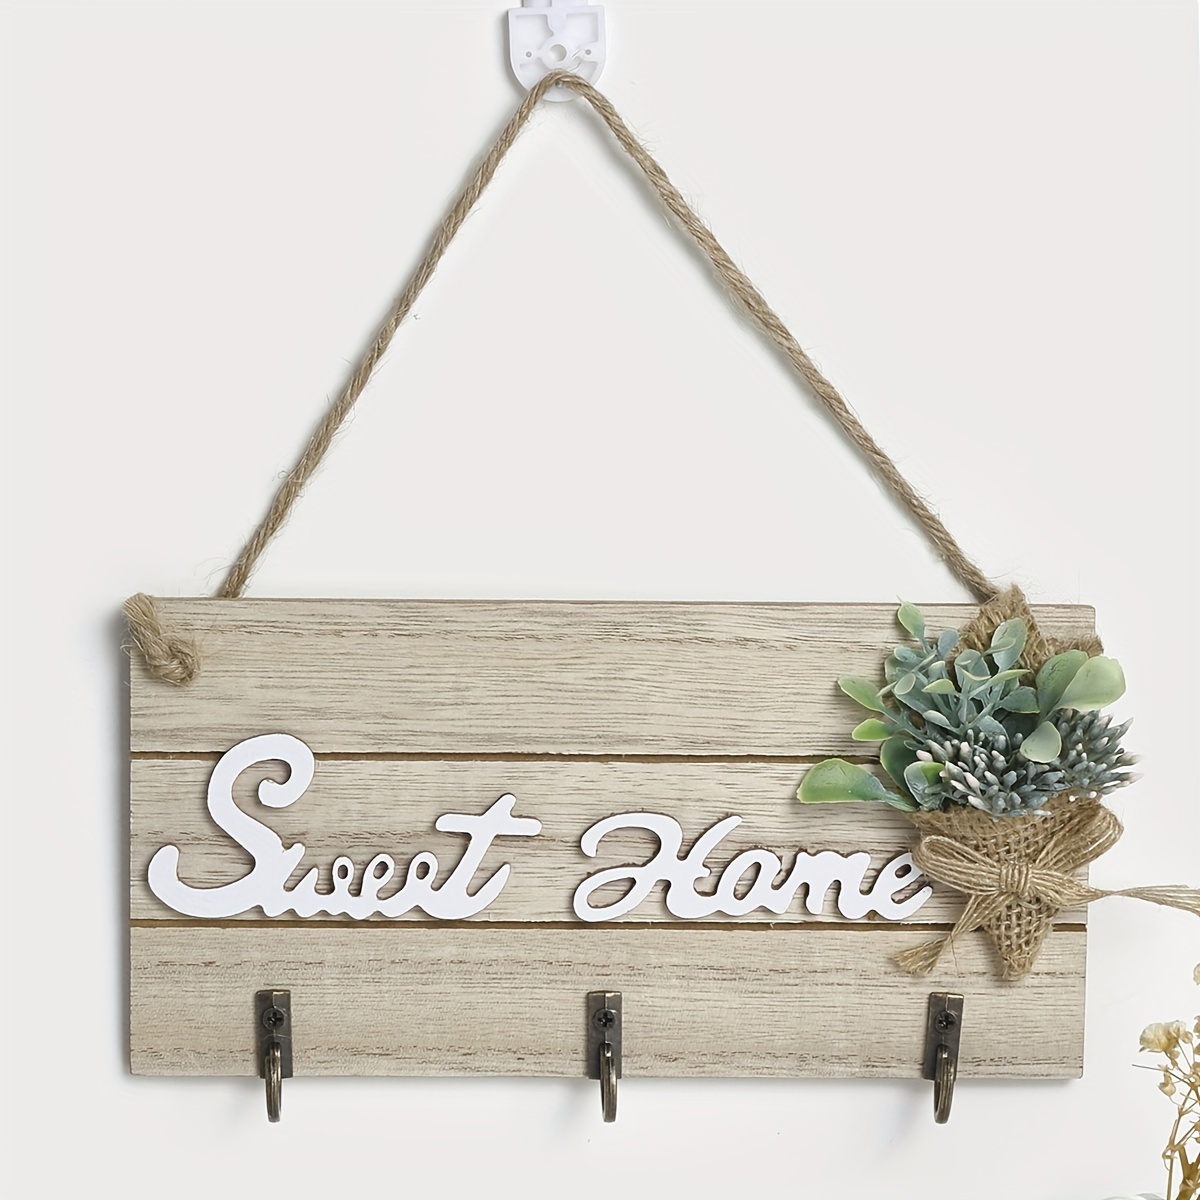 

Contemporary Wooden Wall-mounted Hook Rack With Decorative Florals And "sweet Home" Lettering, Easy Install Entryway Organizer